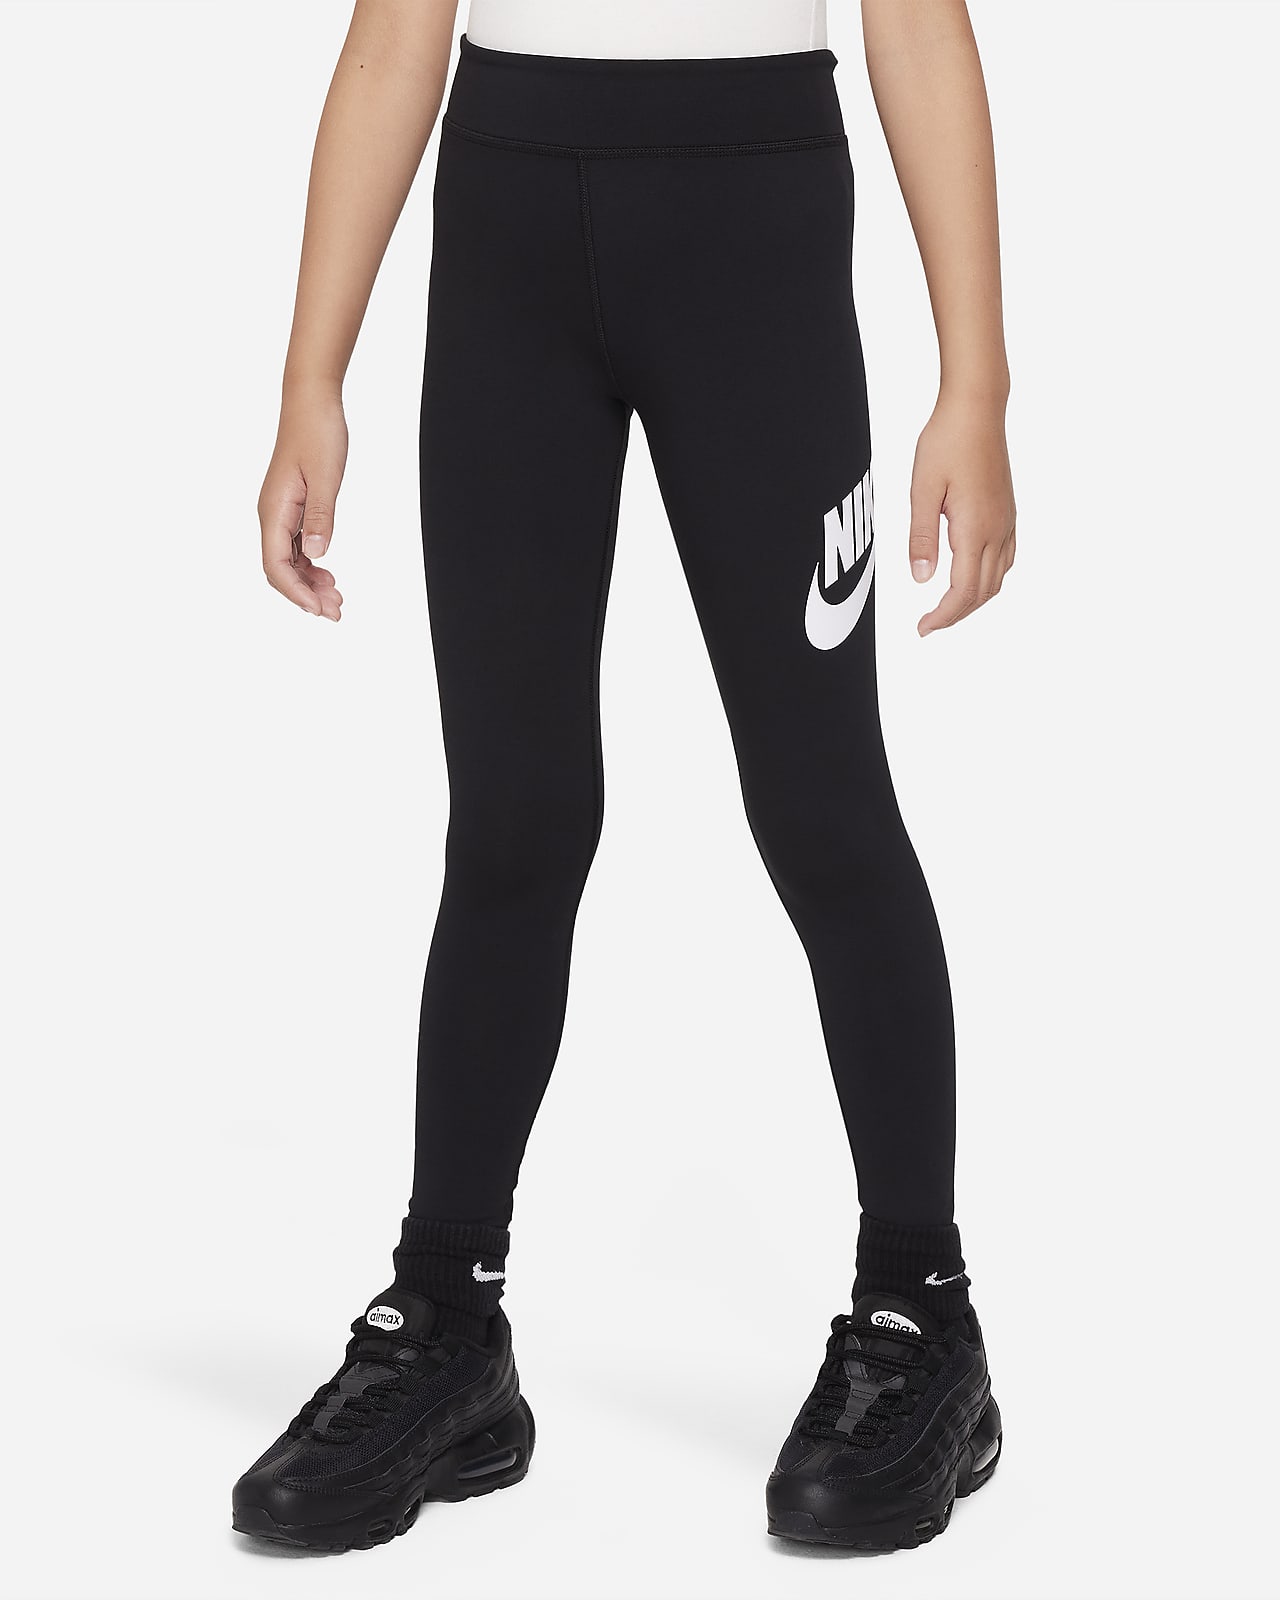 https://static.nike.com/a/images/t_PDP_1280_v1/f_auto,q_auto:eco/c7c4267f-c167-4f0a-90bf-923ff013fabd/leggings-a-vita-media-sportswear-essential-21ZDd2.png